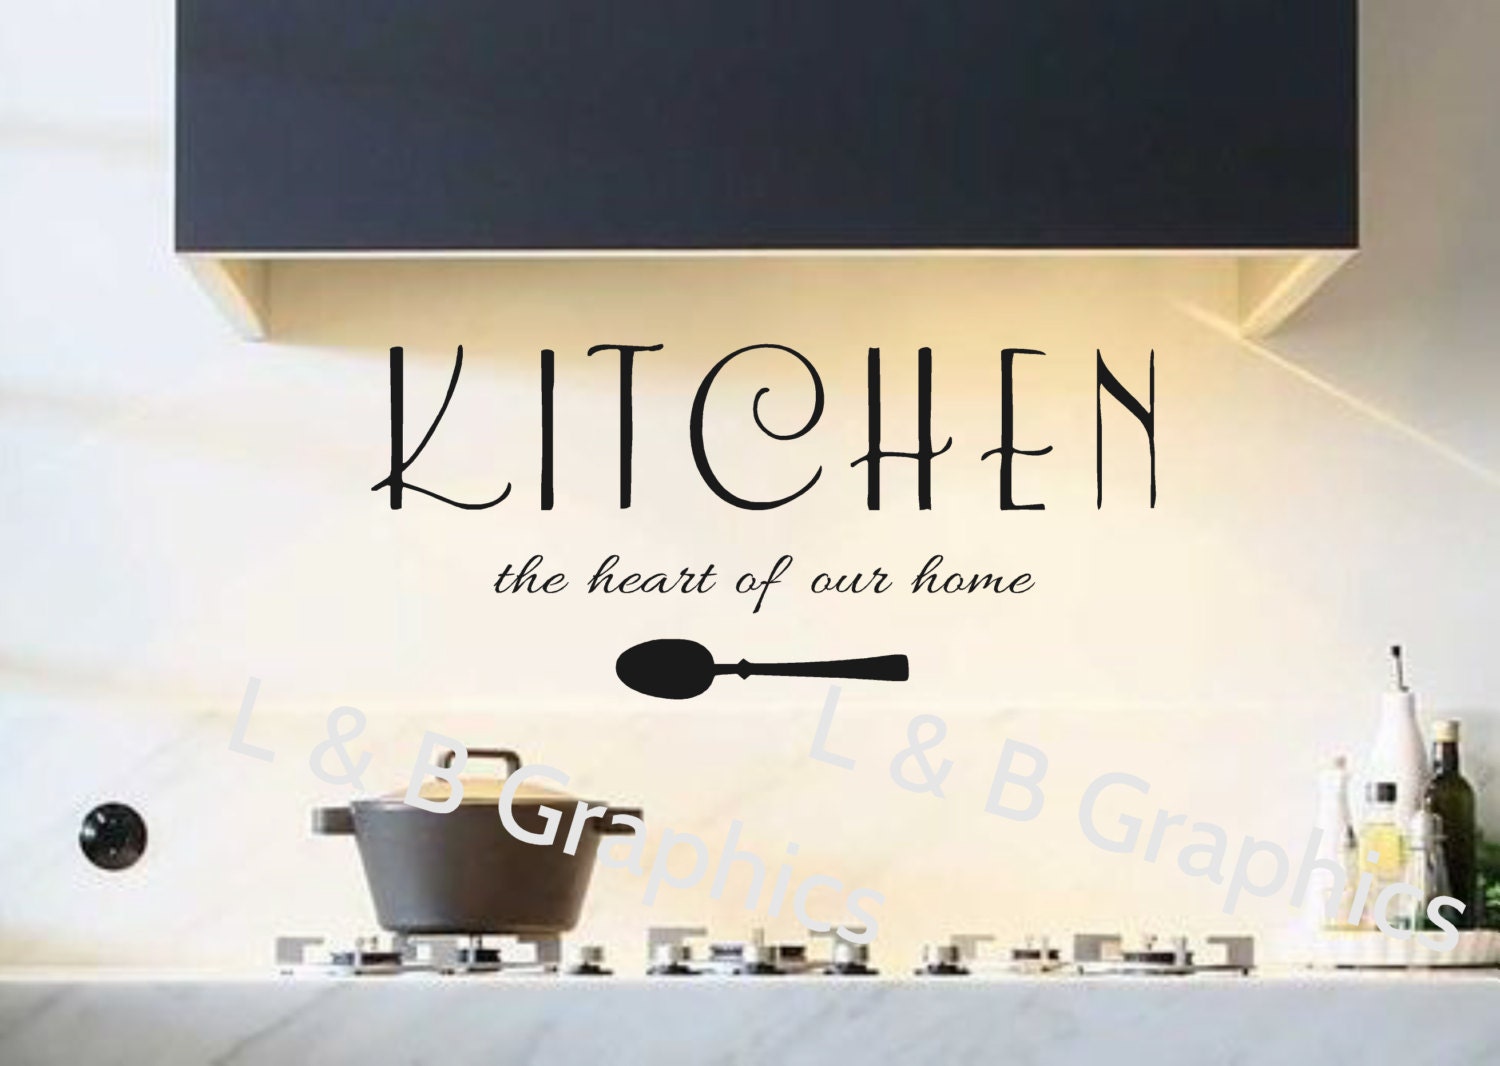 Kitchen Vinyl Wall Decal Quote-Kitchen the heart by landbgraphics